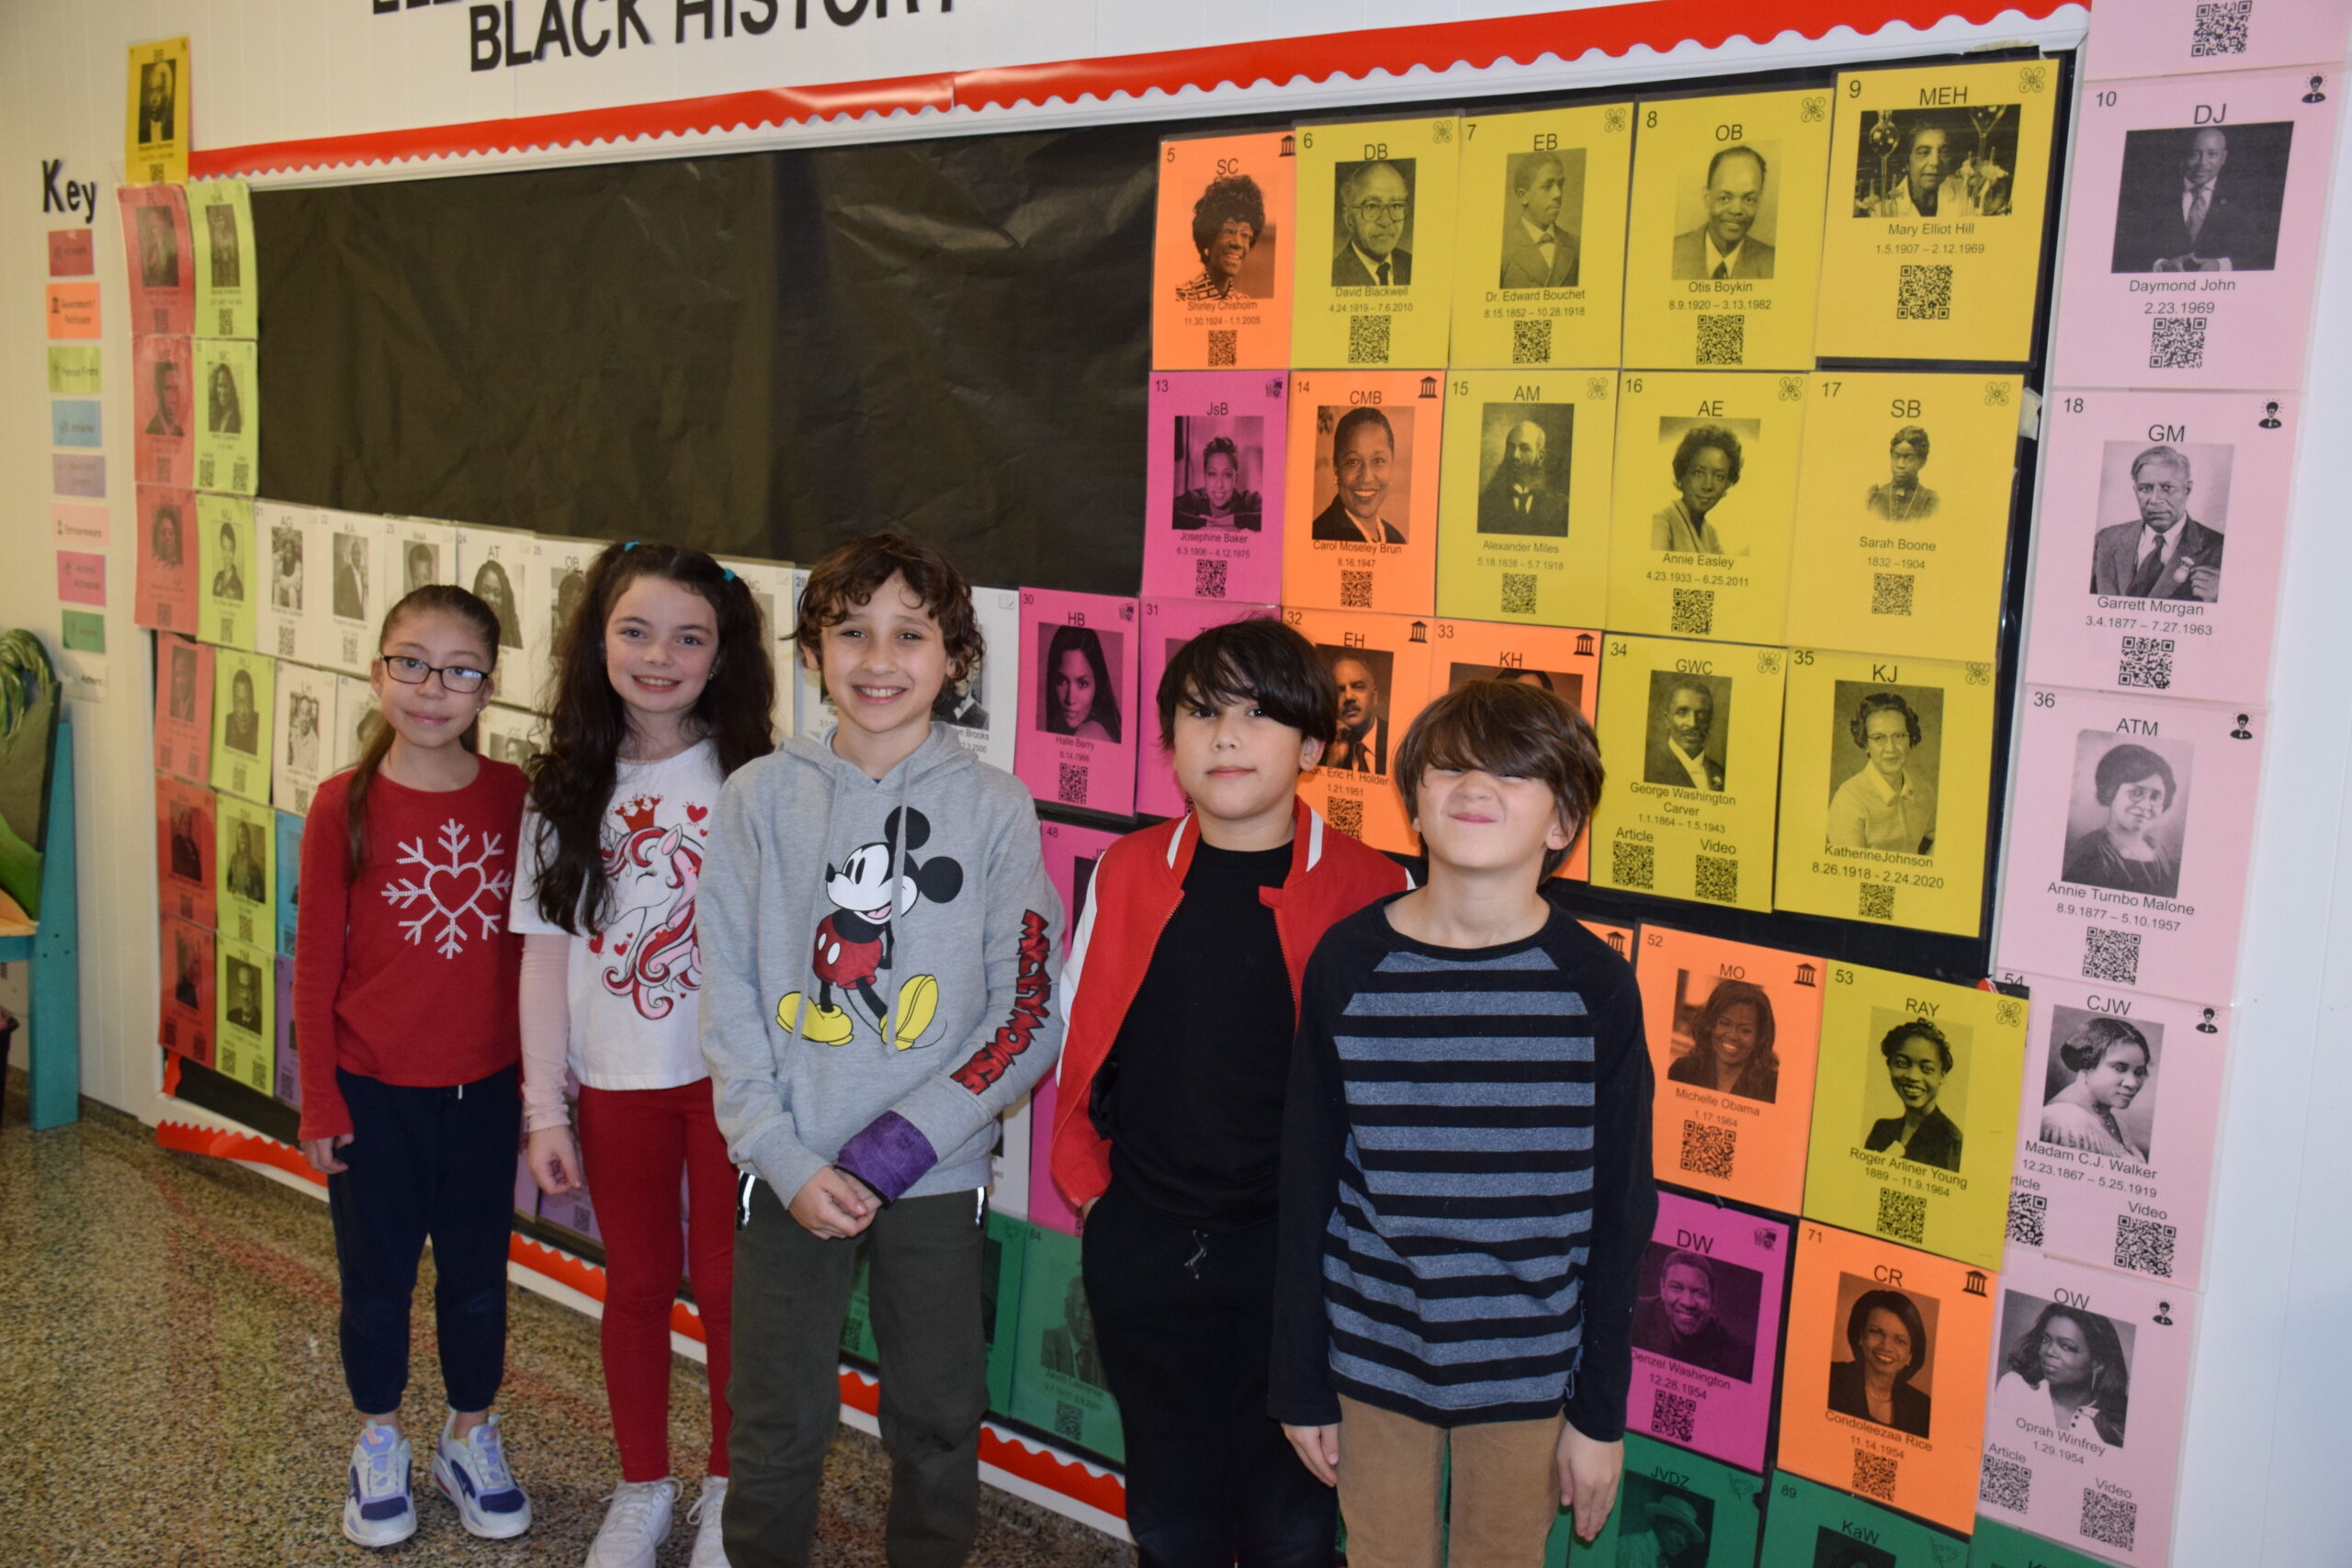 In honor of Black History Month, Westhampton Beach Elementary School students are learning about influential African Americans through an interactive display in the school’s main hallway. The “Essential Elements of Black History” display, set up in the form of the Periodic Table of Elements, features QR codes that students can scan to access more information from a variety of age-appropriate, online sources. In addition, students are working to build a “Rooted & Grounded in Black History” paper tree display, to which they are adding leaves containing information about what they have learned about famous African Americans. COURTESY WESTHAMPTON BEACH SCHOOL DISTRICT